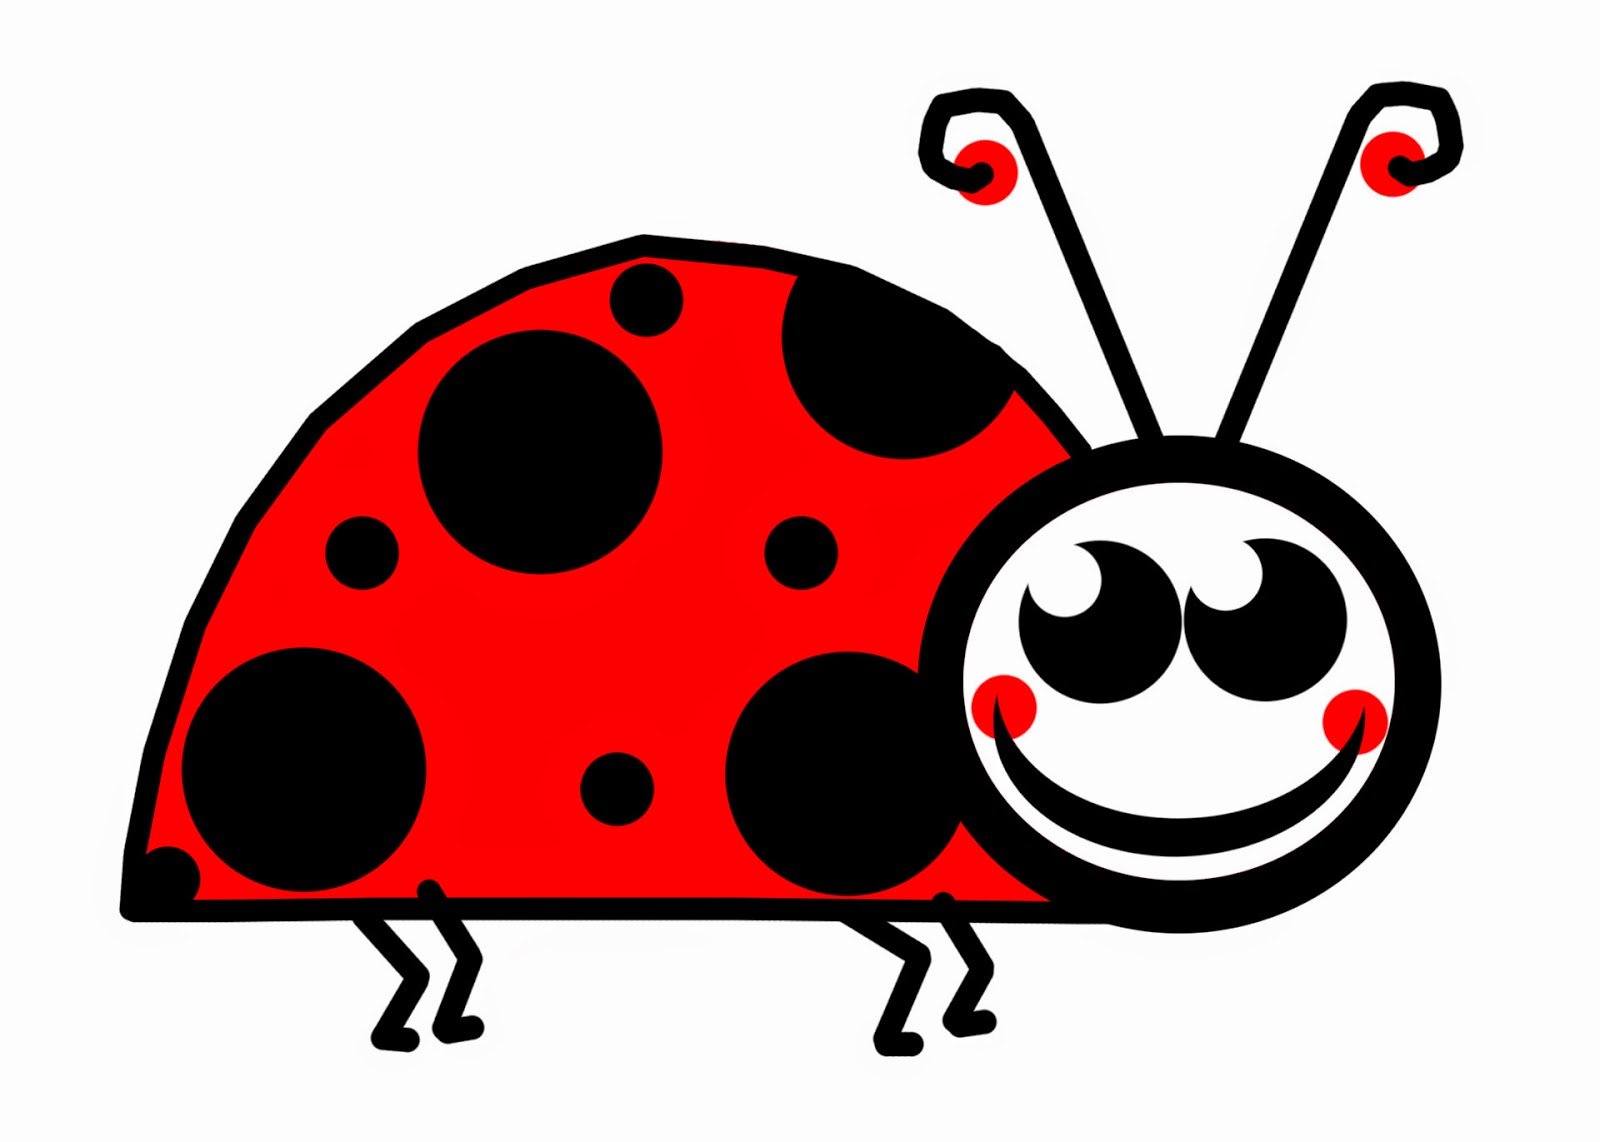 The Ladybug  Cute Classroom Clipart Or Vicious Child Eating Insect